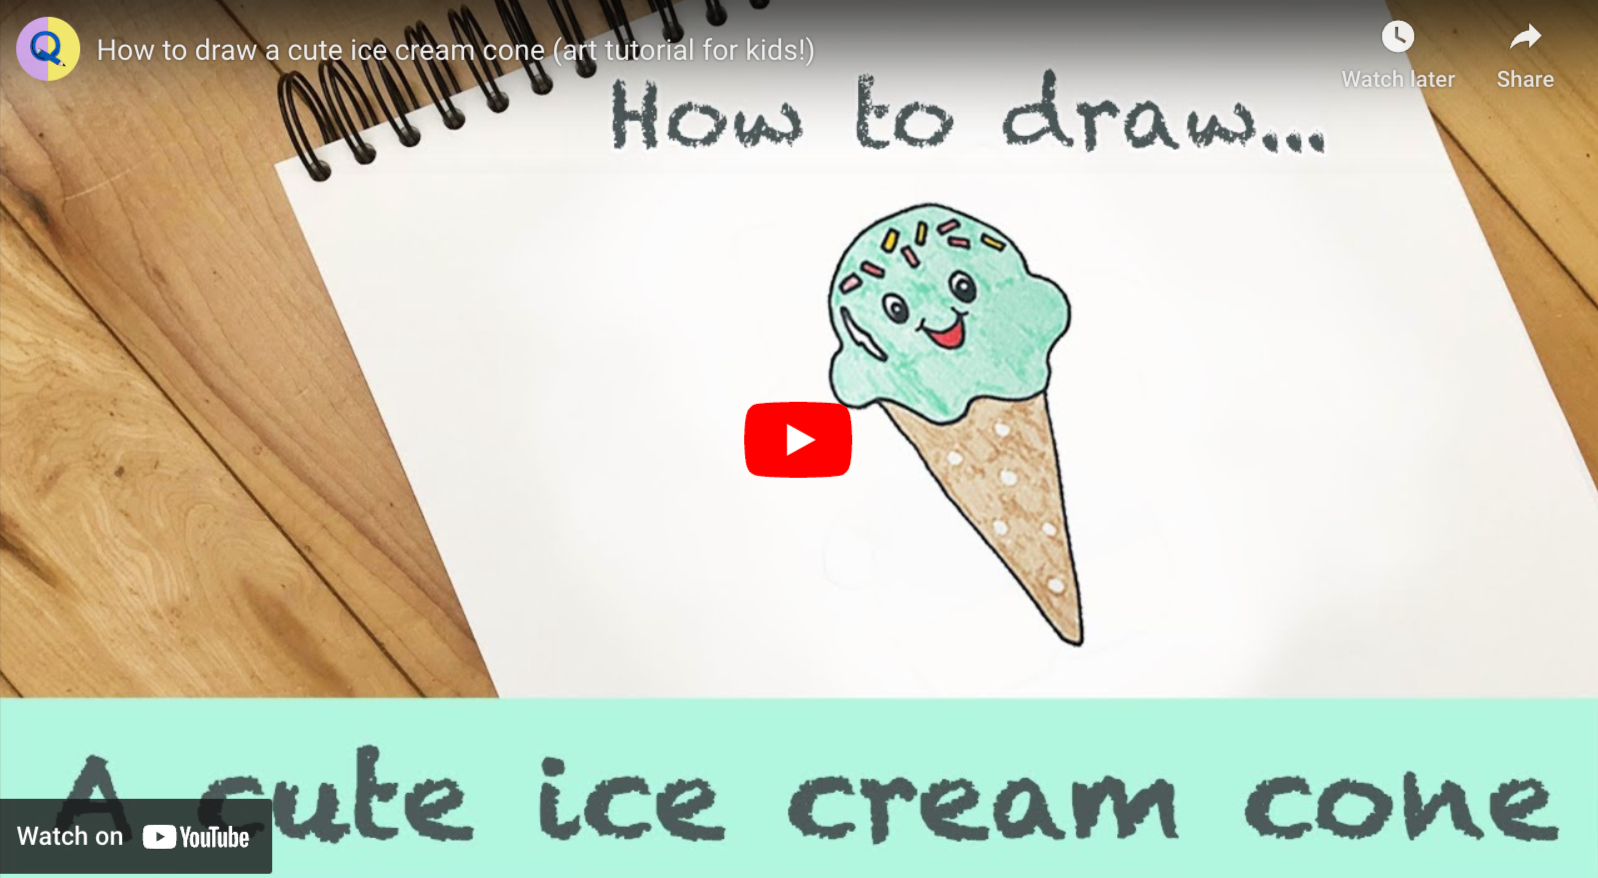 How to Draw Ice Cream Step by Step | Envato Tuts+